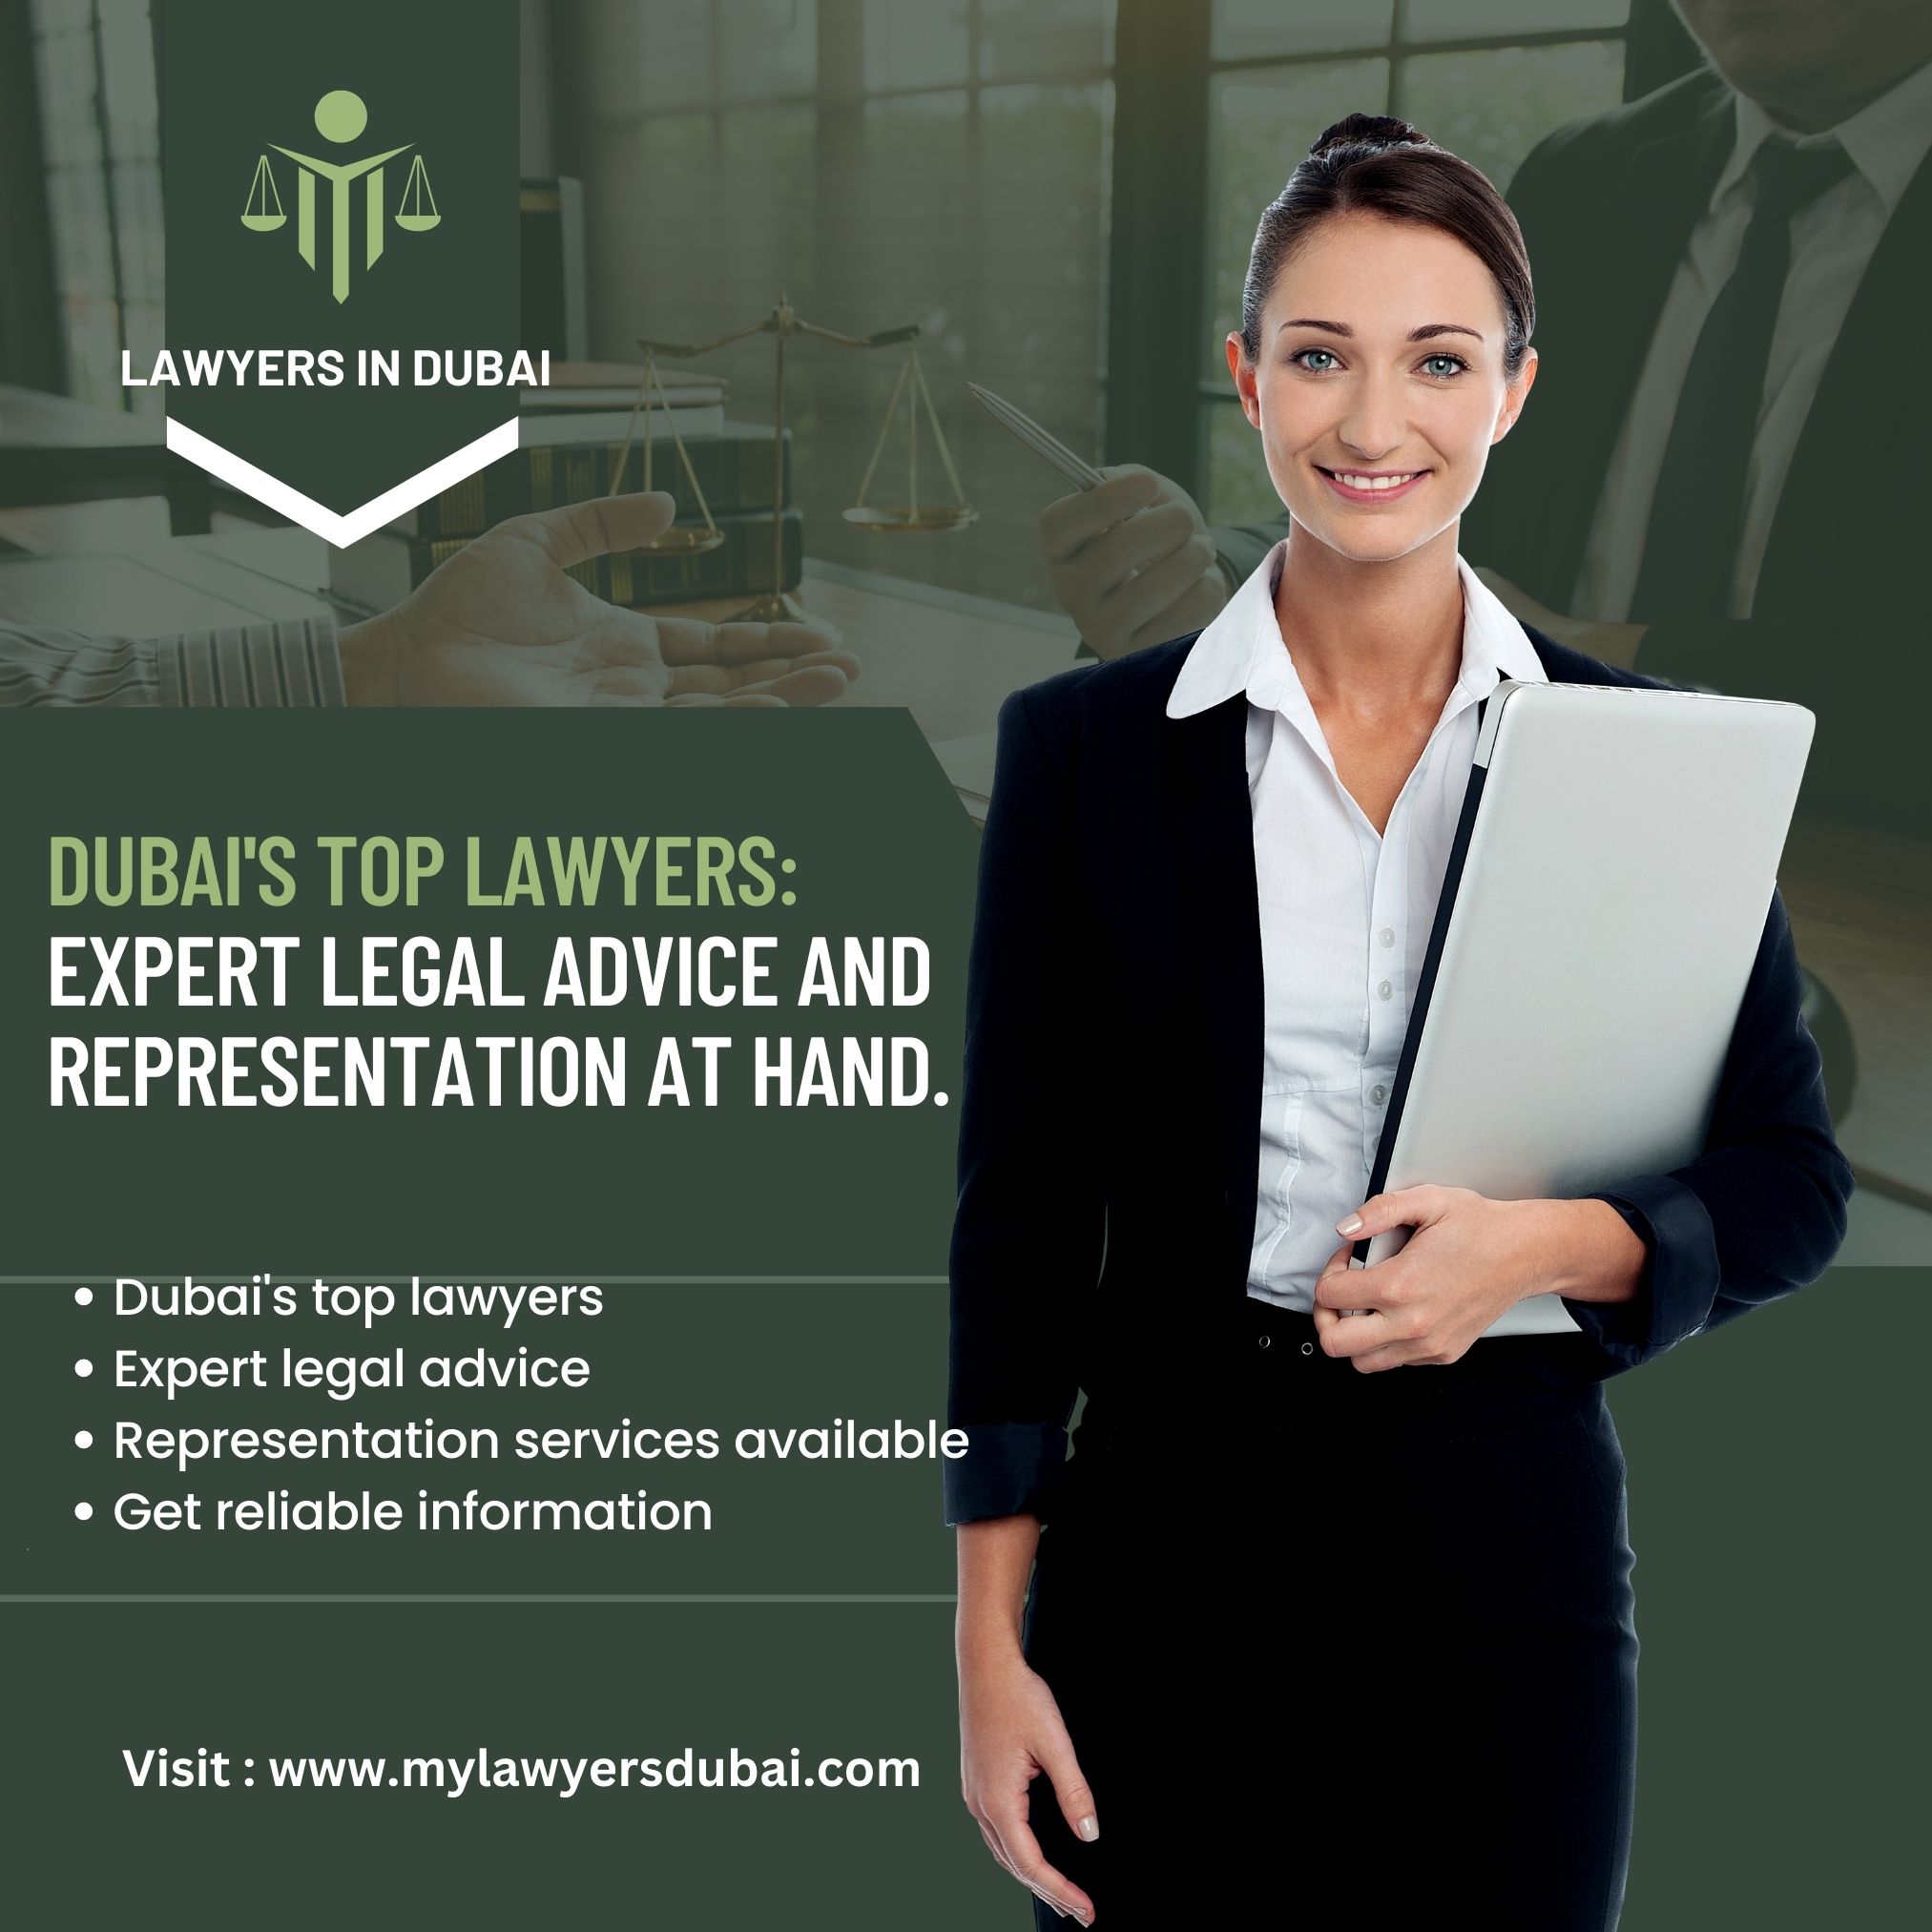 Top Lawyers in Dubai for Legal Advice and Representation